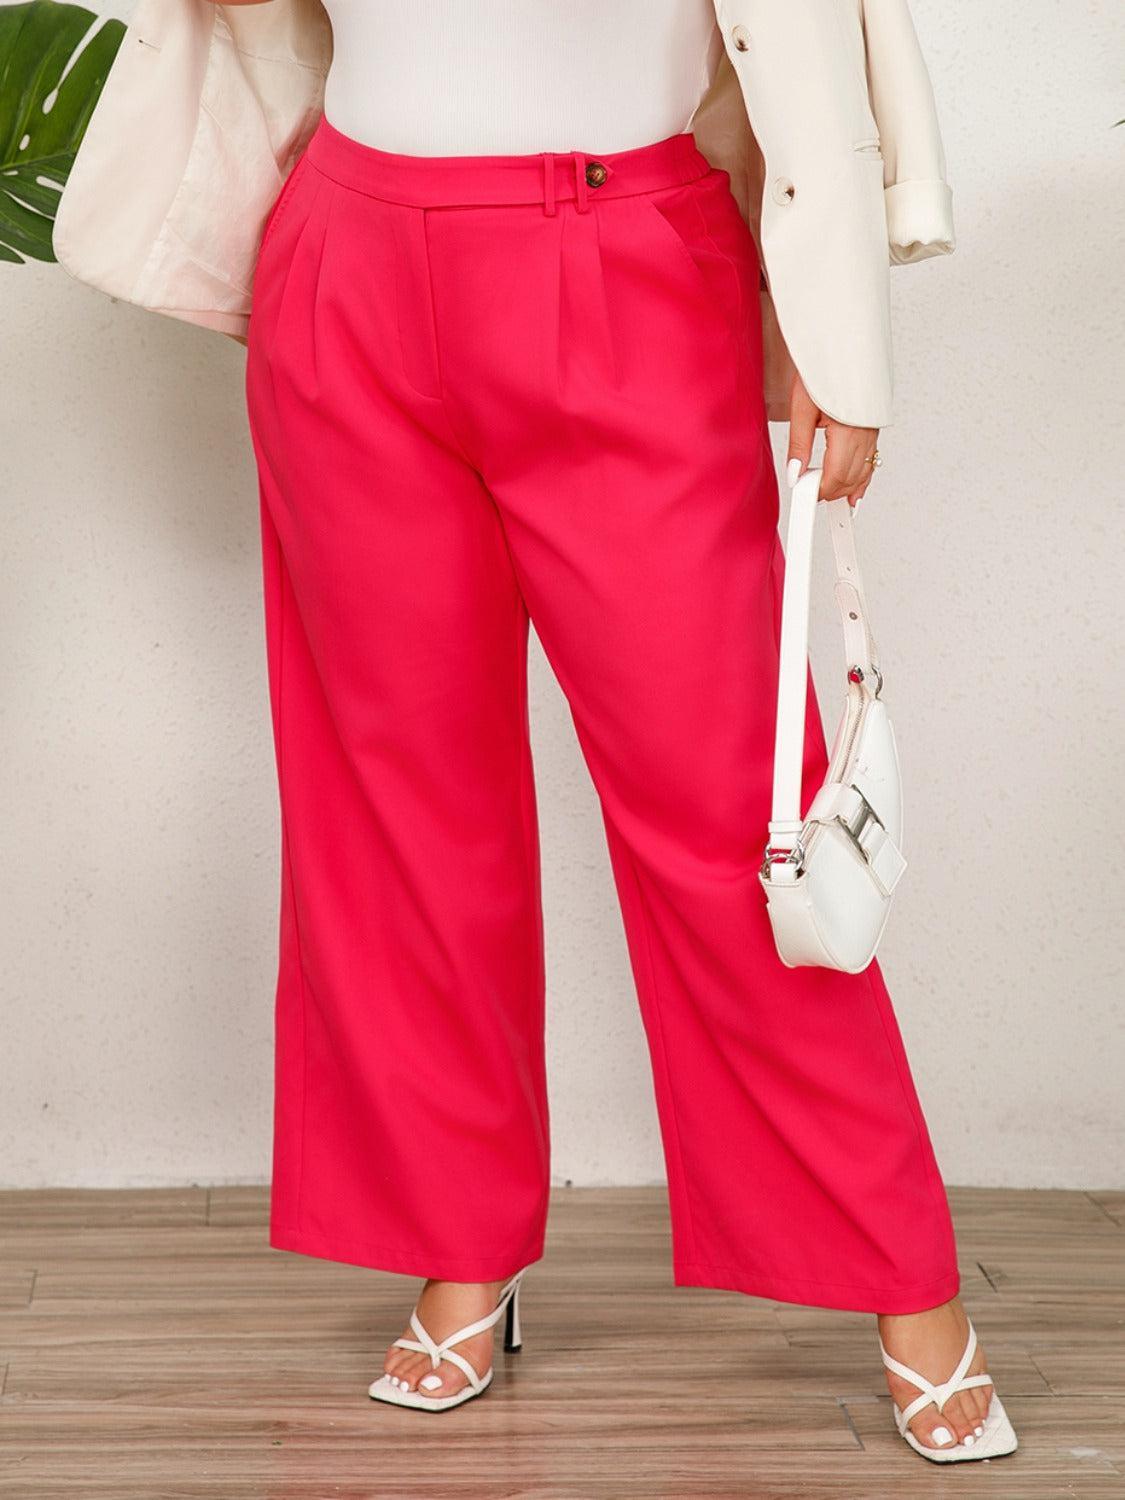 a woman in a white top and pink pants